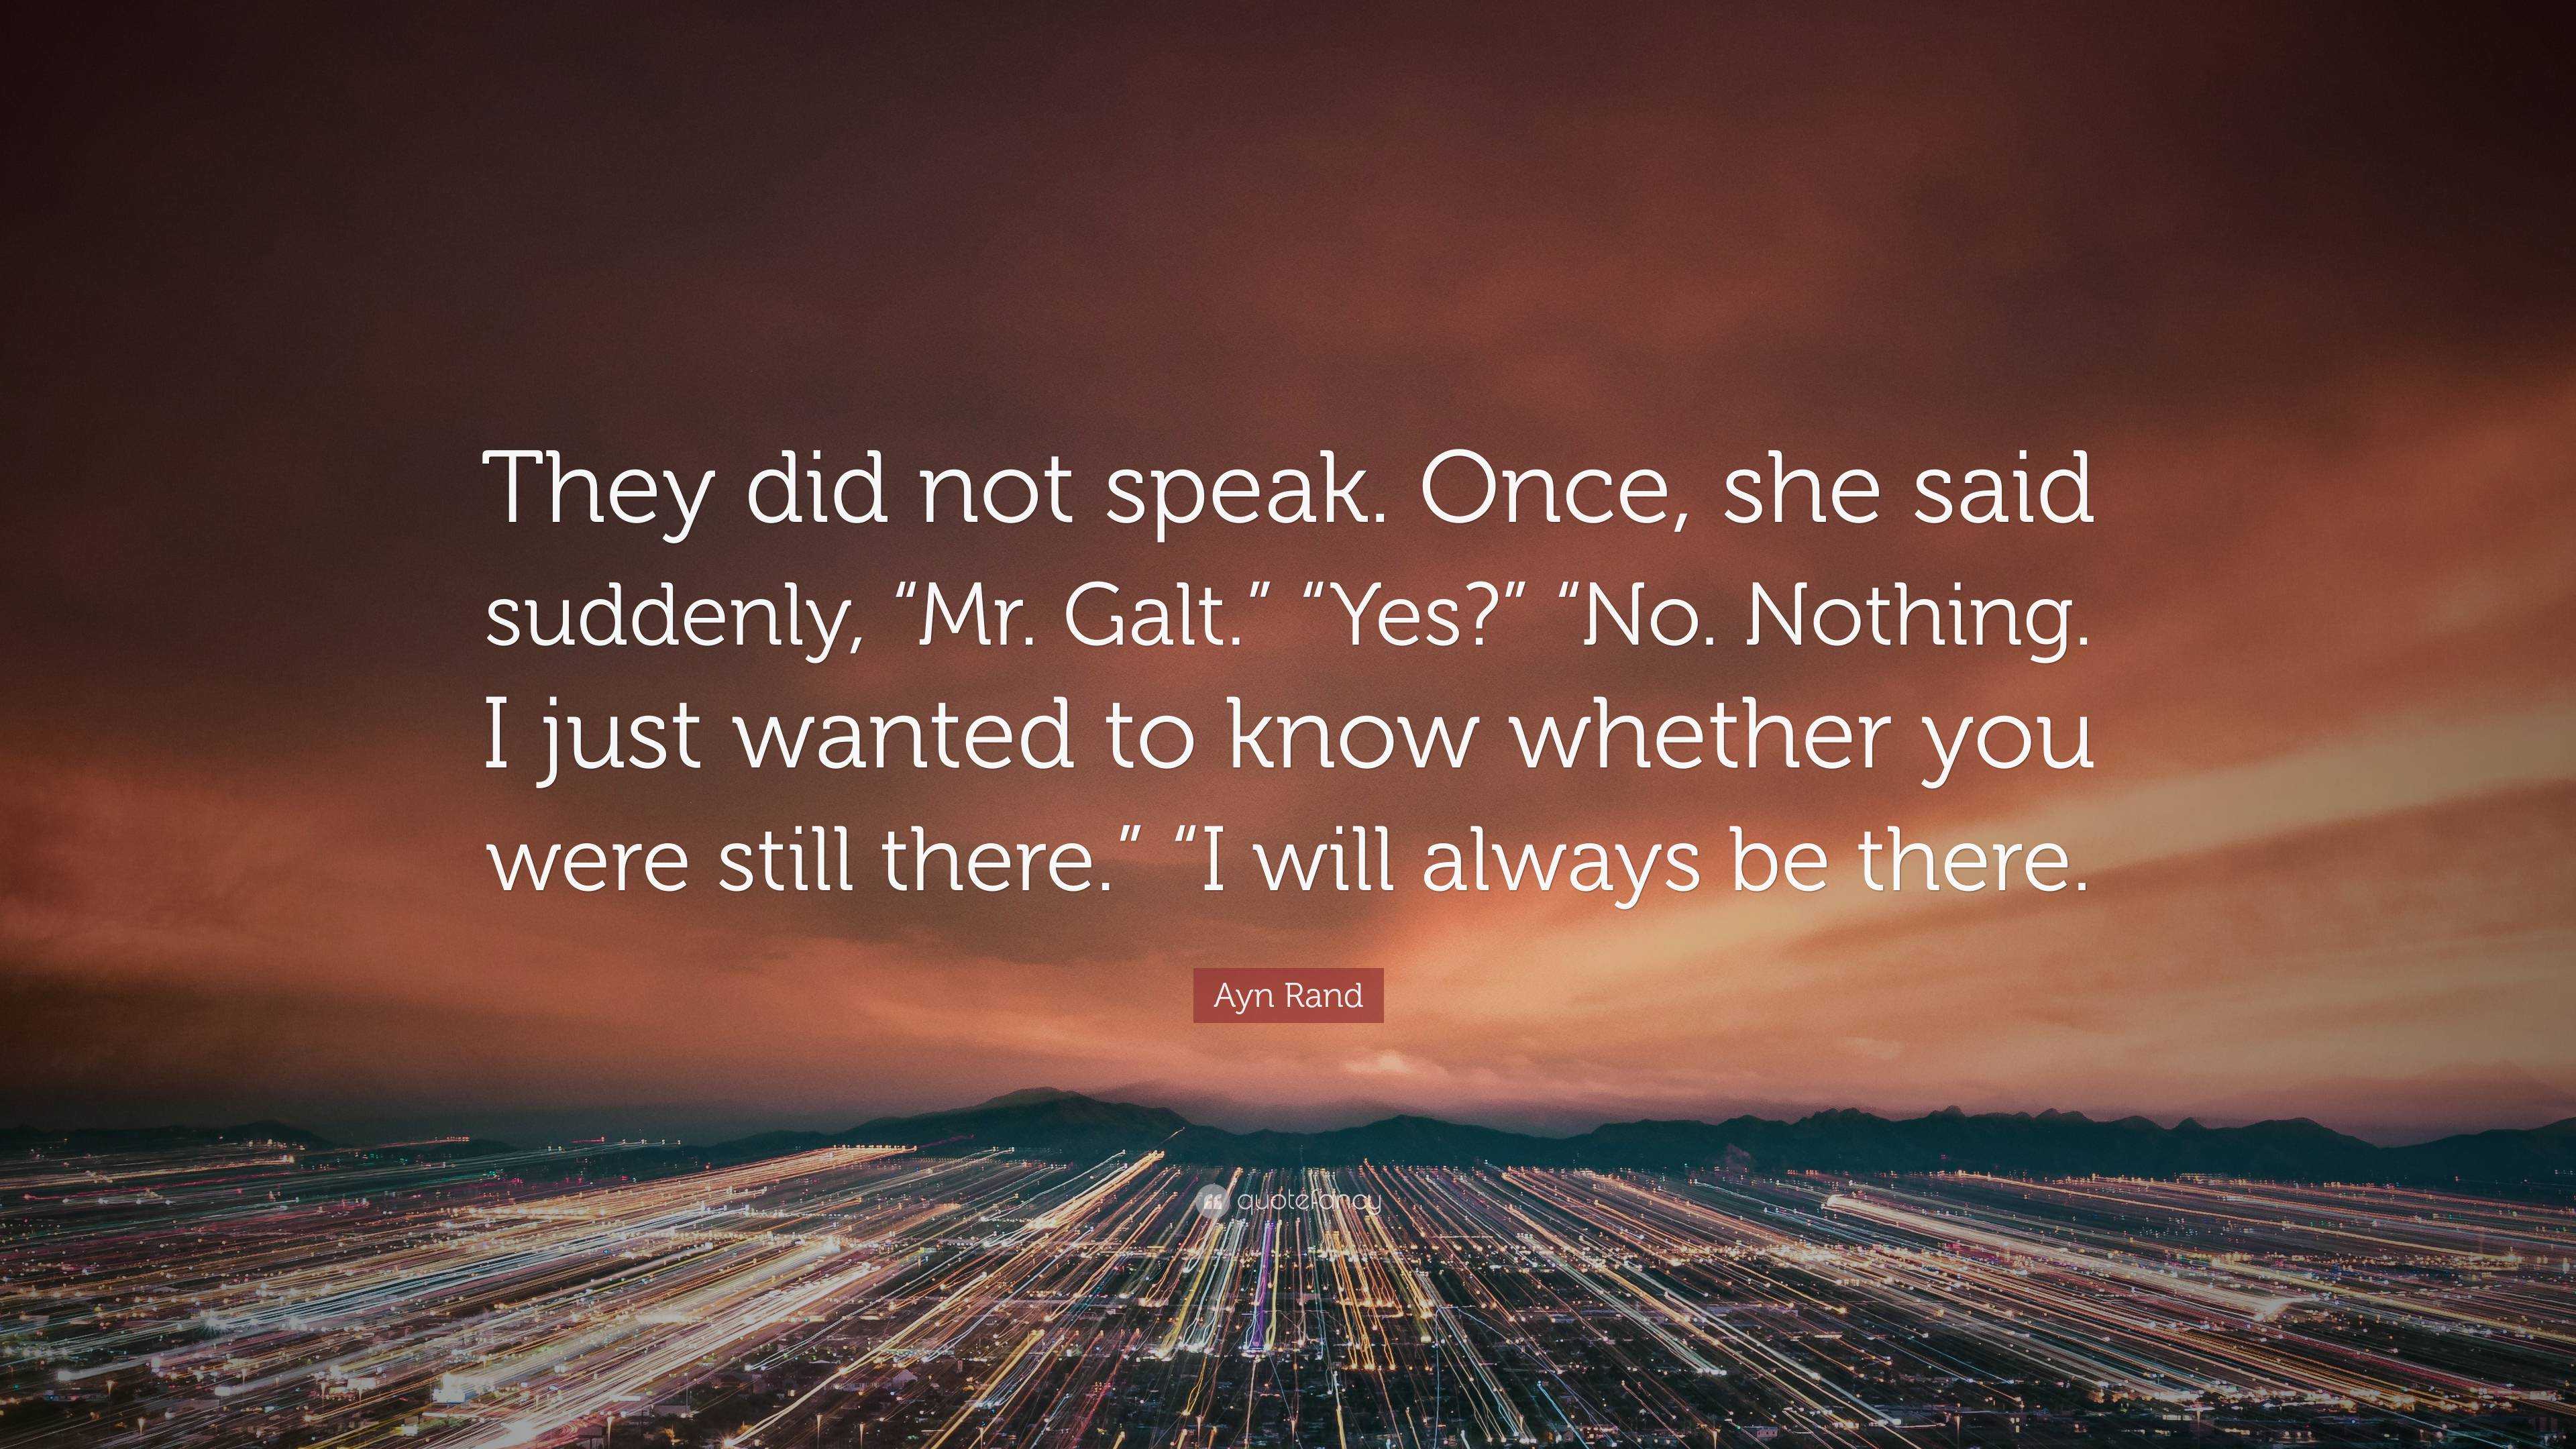 Ayn Rand Quote: “They did not speak. Once, she said suddenly, “Mr. Galt ...